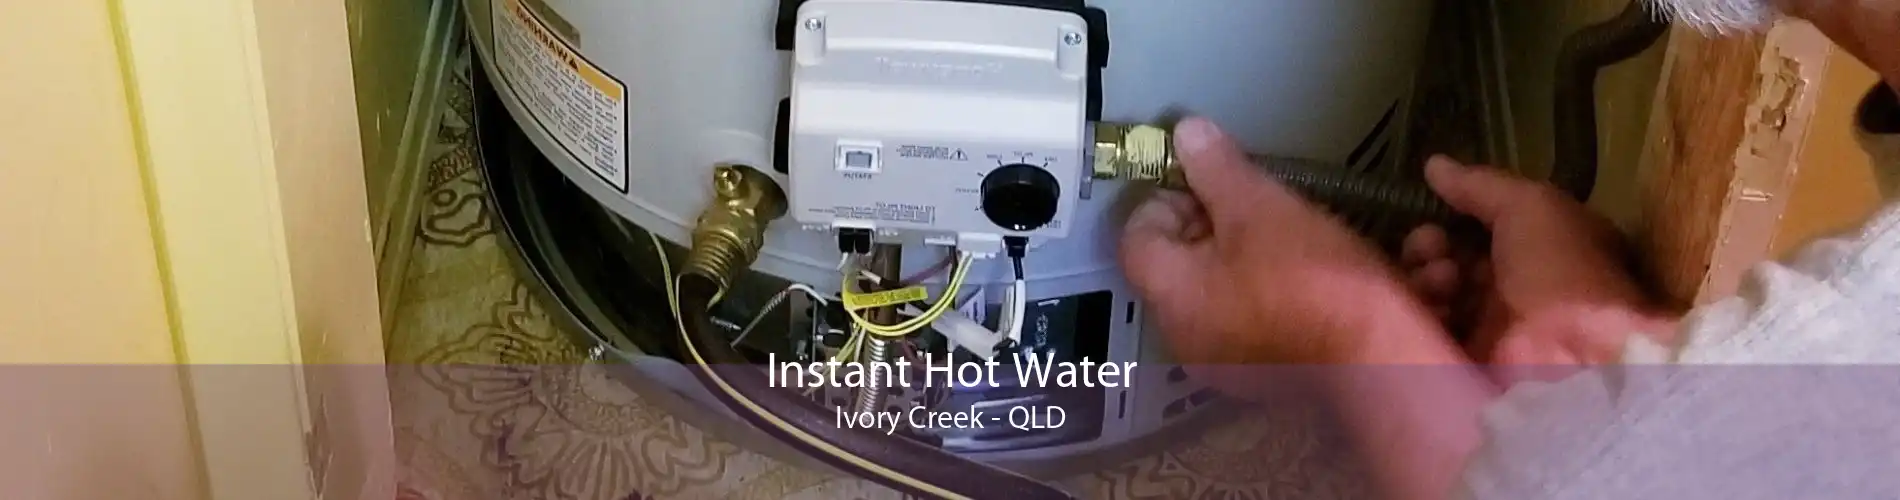 Instant Hot Water Ivory Creek - QLD